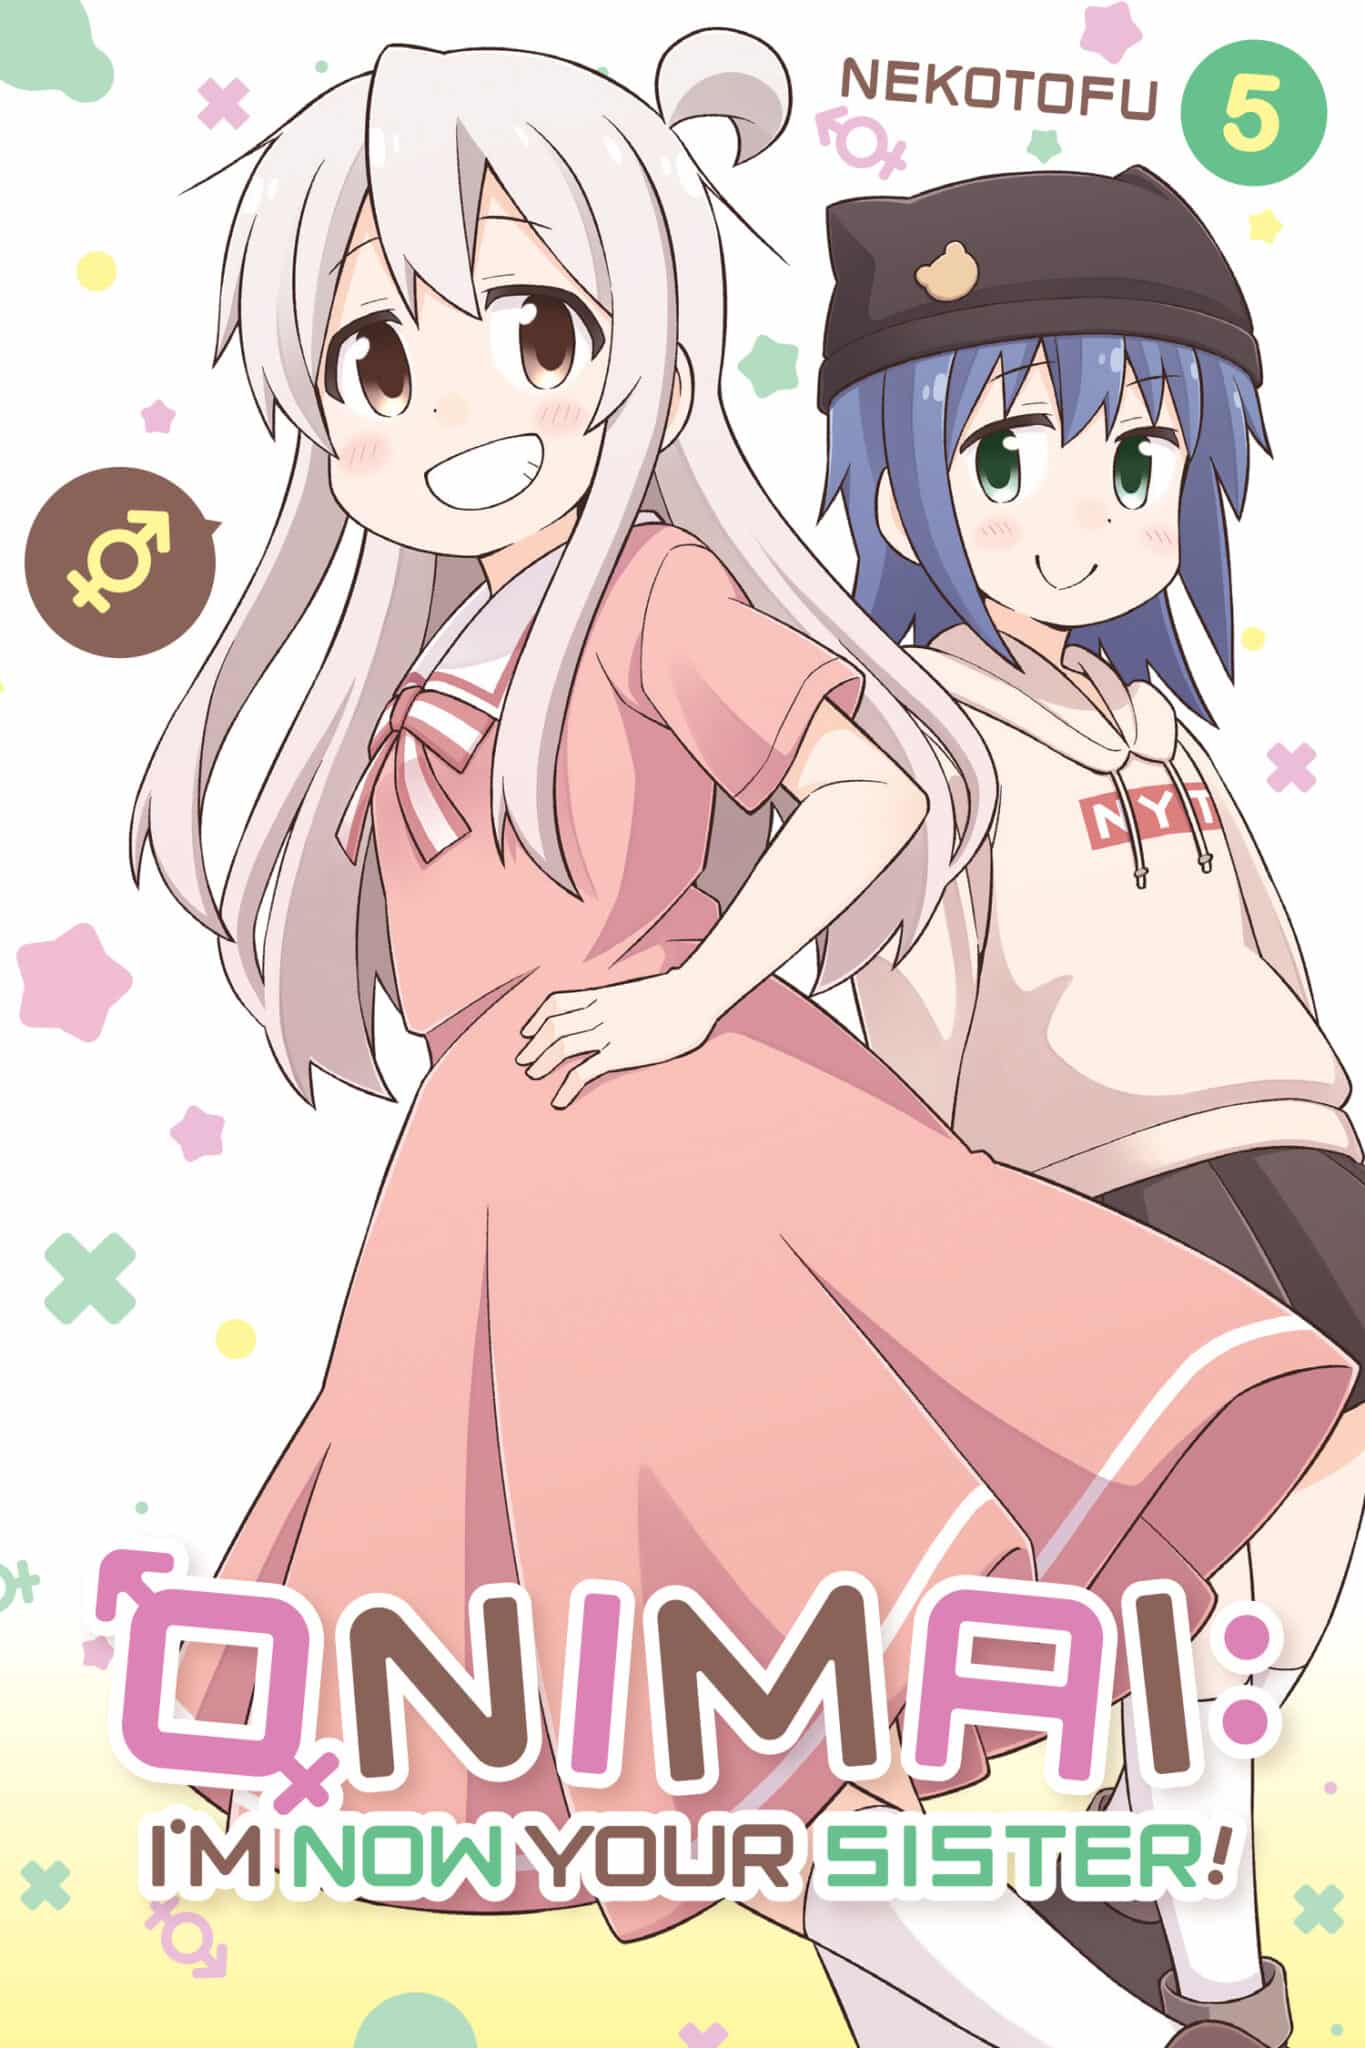 Onimai: I'm Now Your Sister! Volume 5